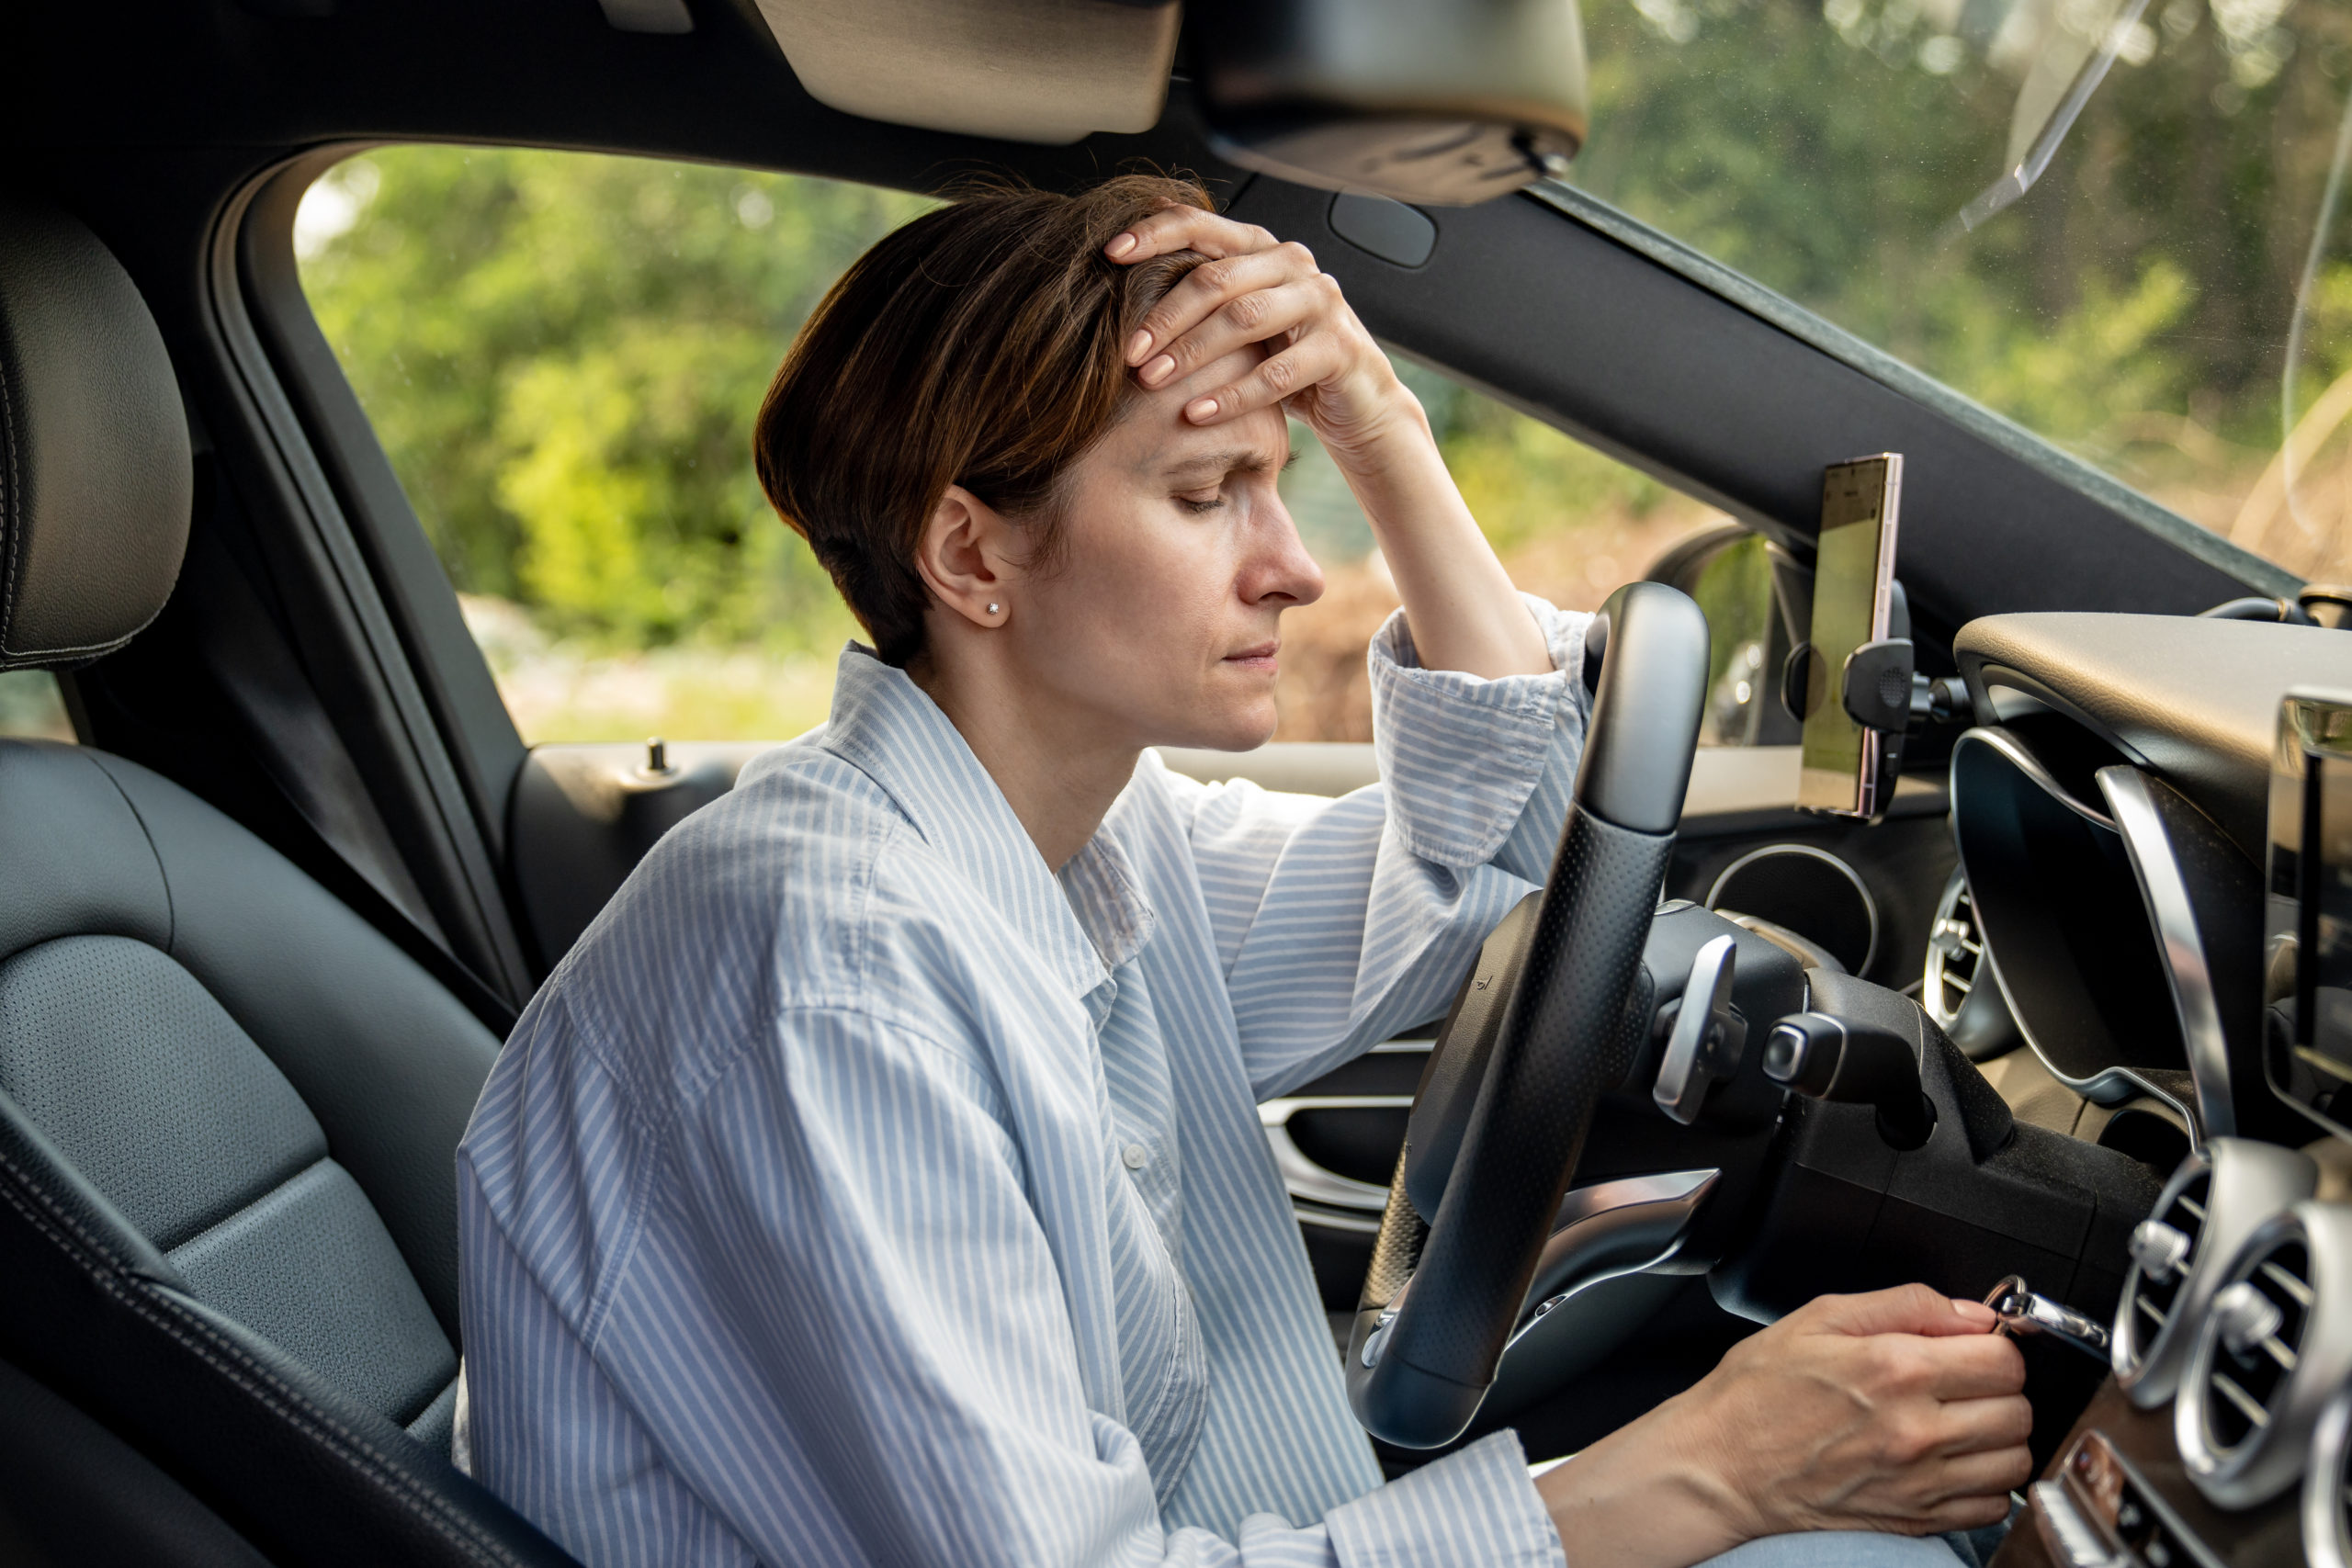 https://autolab.com.co/wp-content/uploads/tired-woman-stopped-after-driving-car-thinking-ab-2023-11-27-05-29-32-utc-scaled.jpg